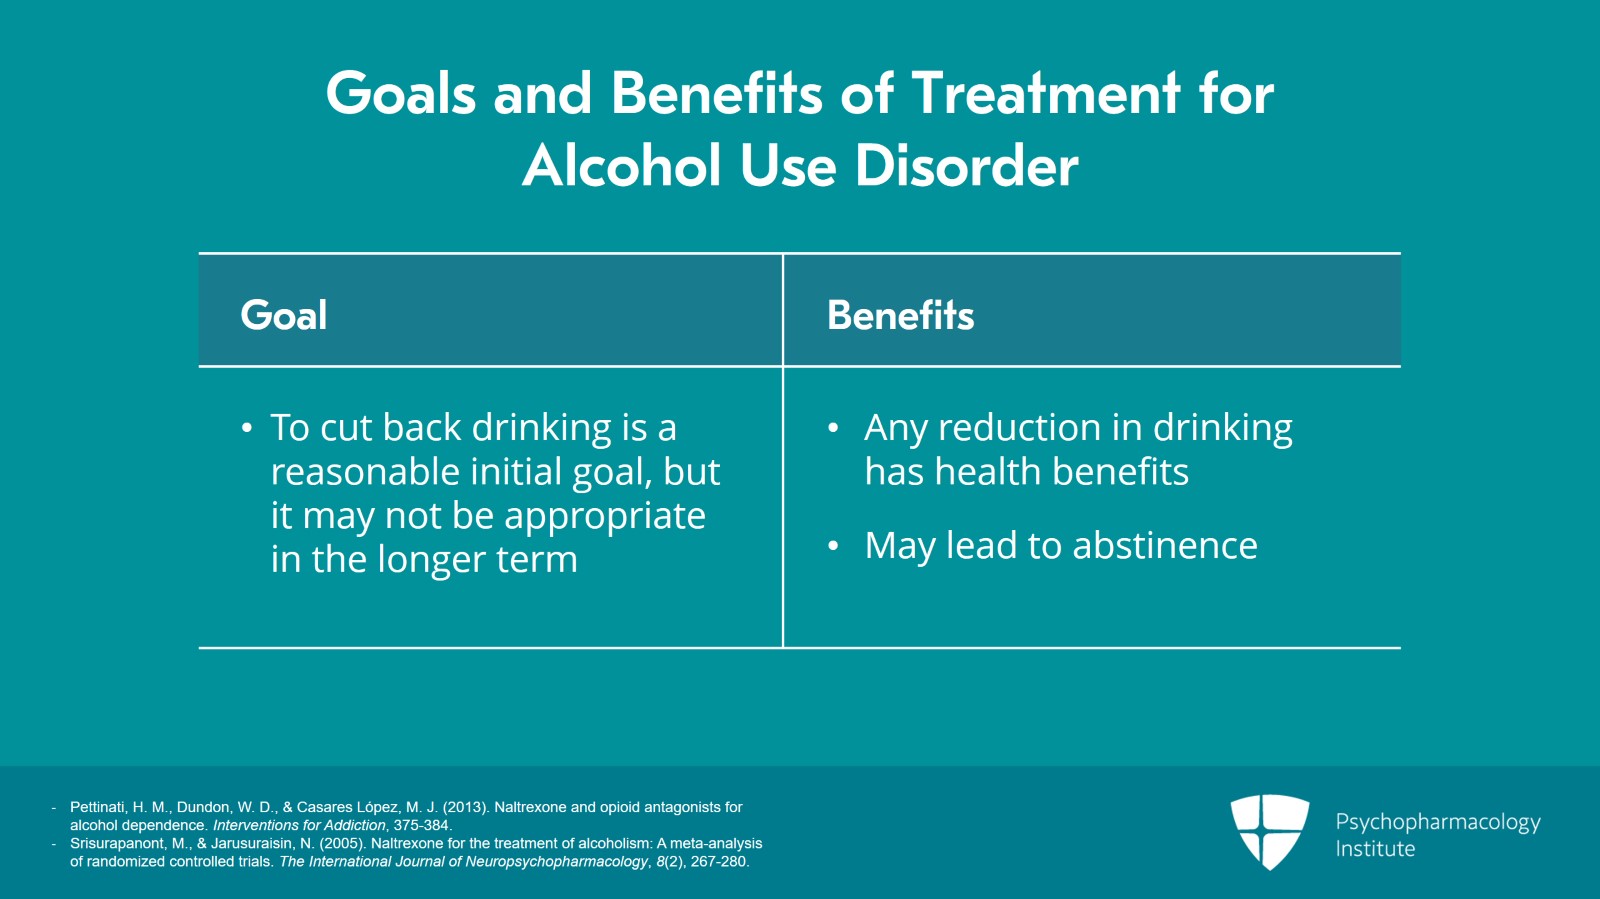 3 Medications That May Help Treat Unhealthy Alcohol Use